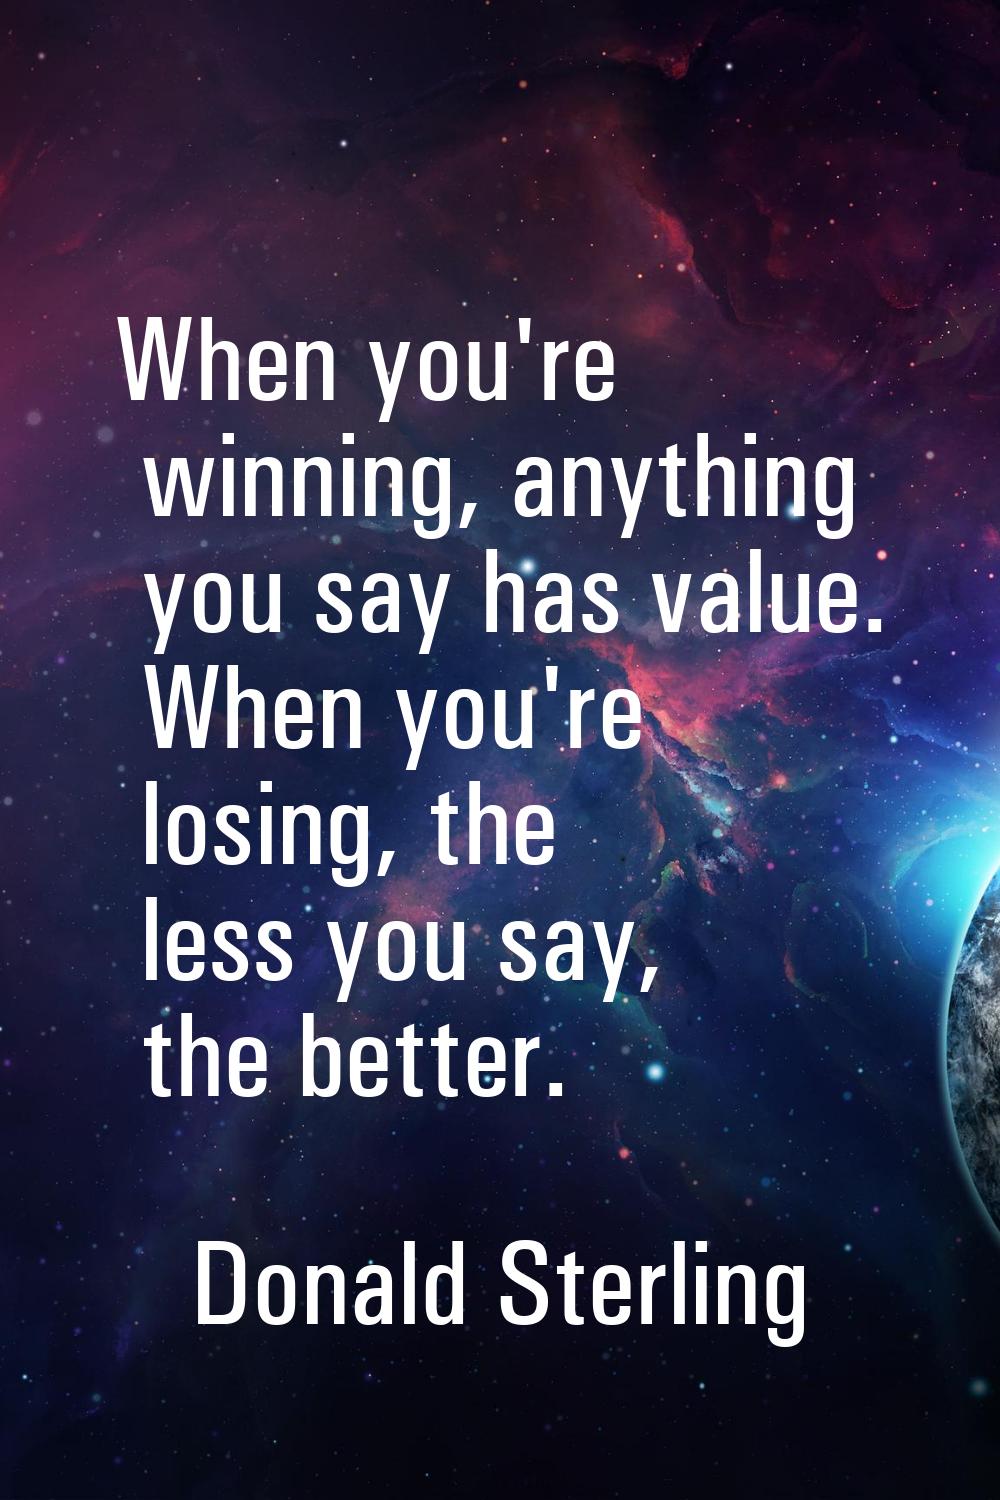 When you're winning, anything you say has value. When you're losing, the less you say, the better.